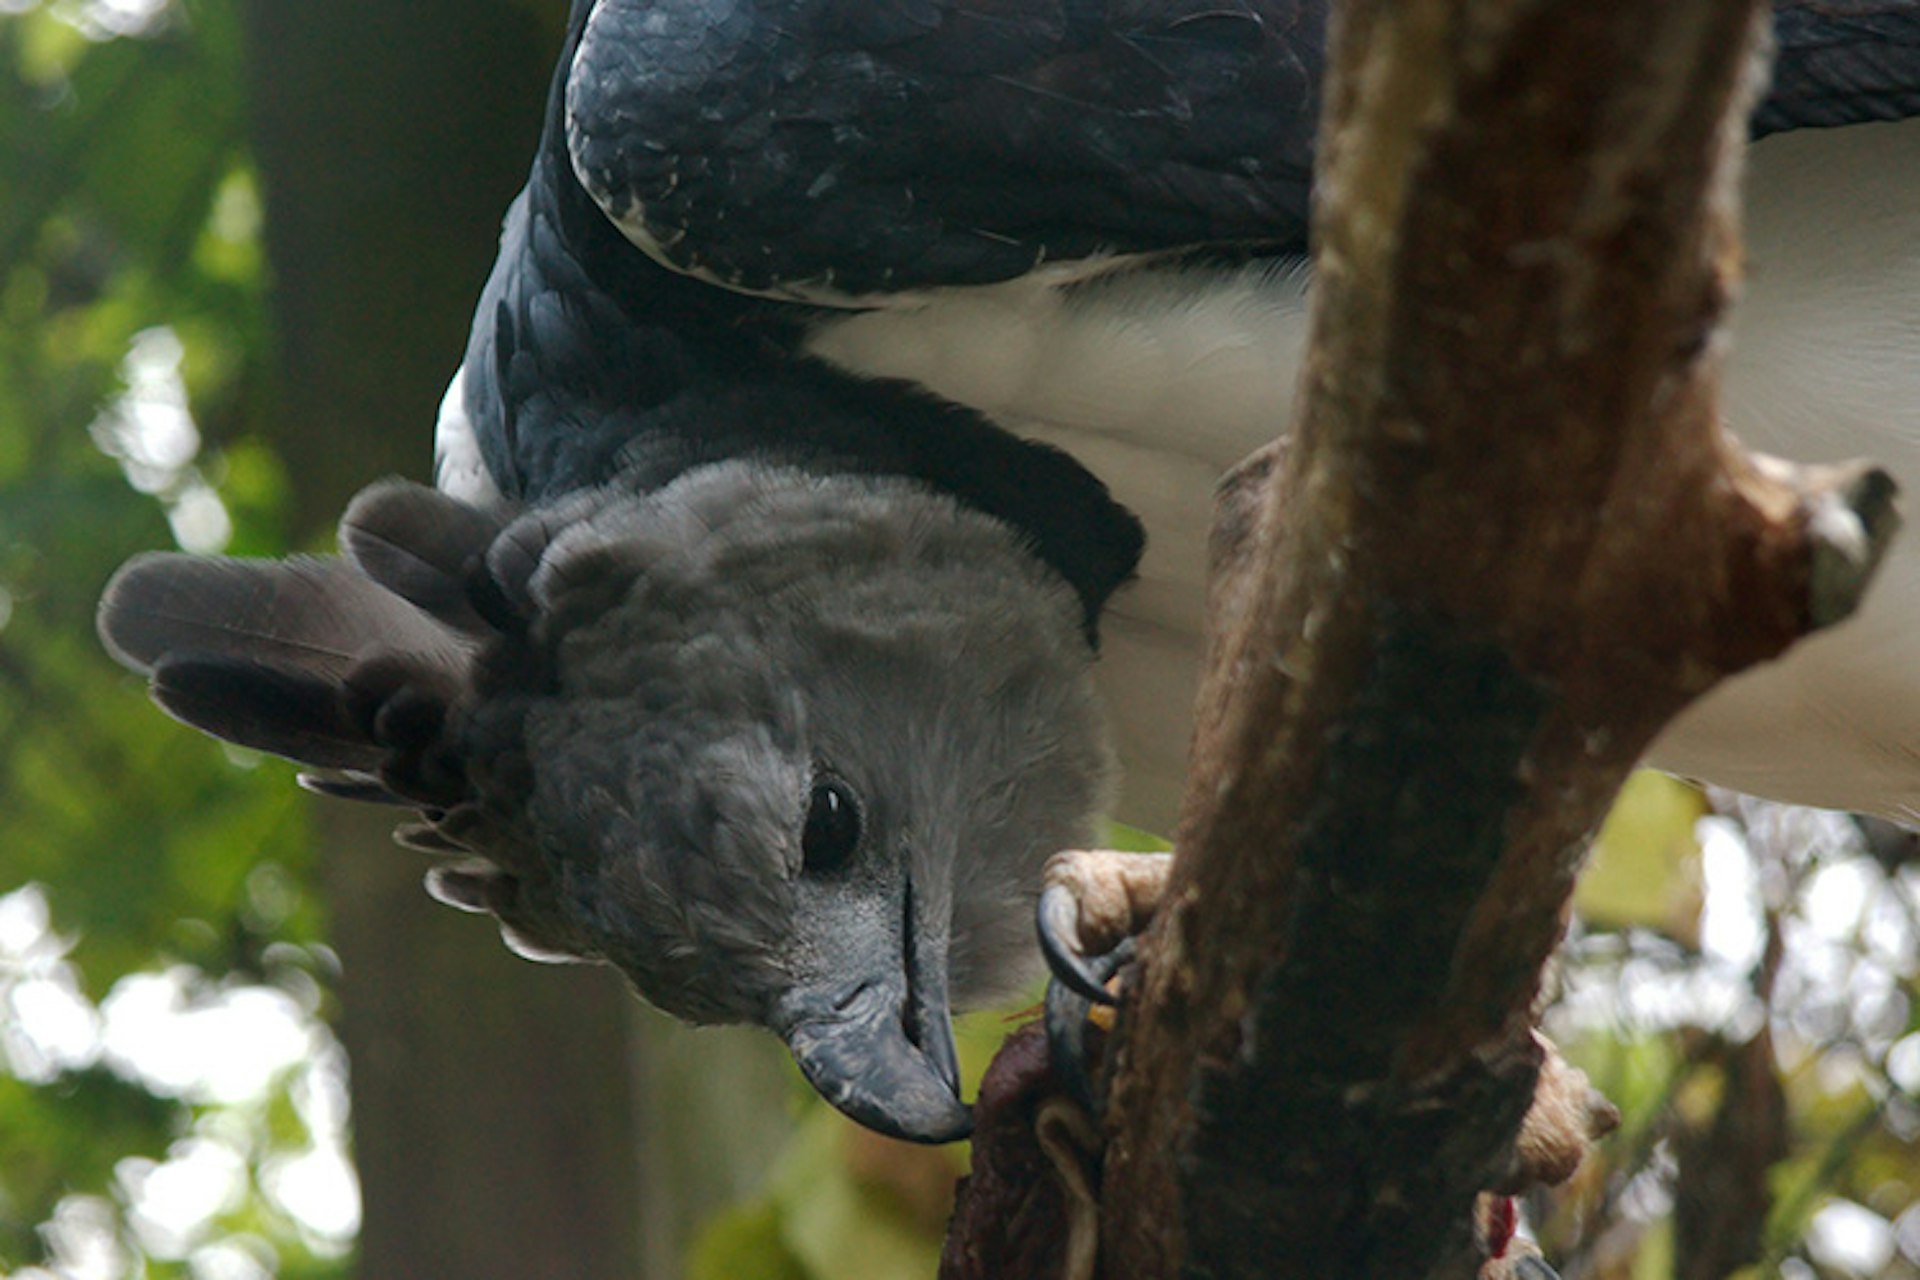 The fearsome - and rarely seen - harpy eagle. Image by Andy Rogers / CC BY 2.0